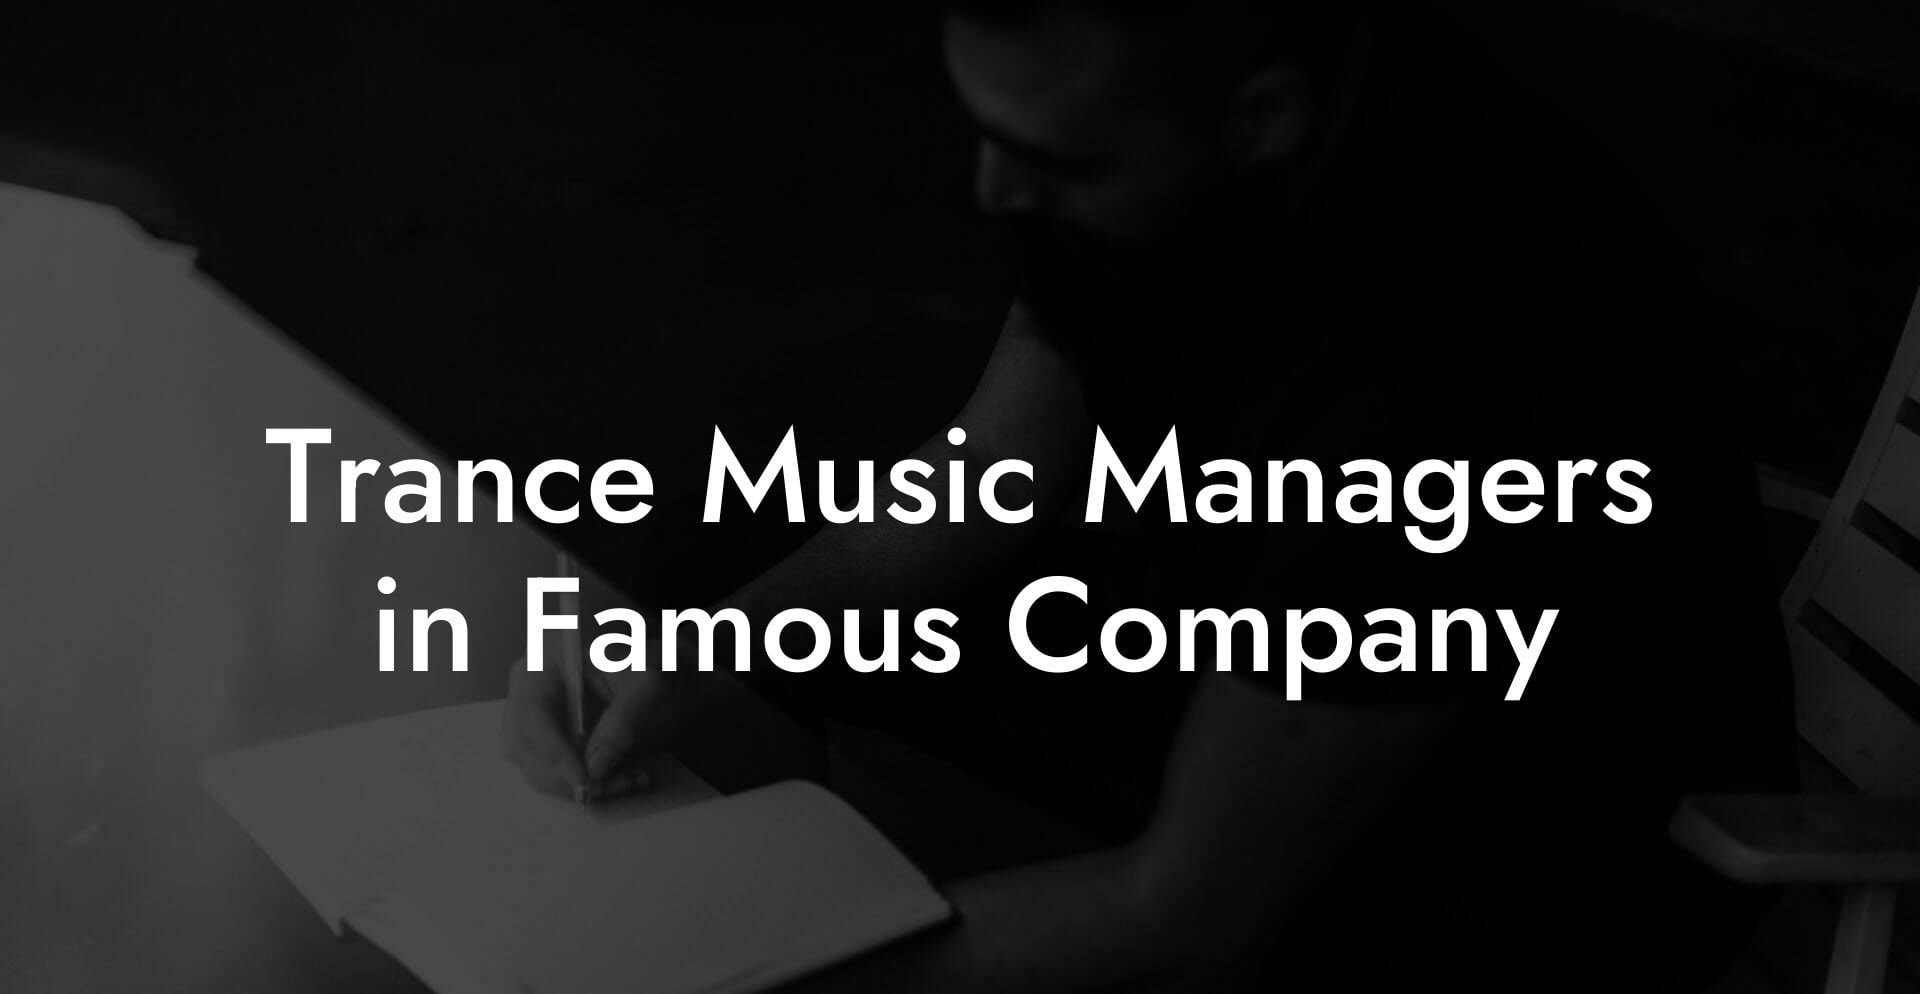 Trance Music Managers in Famous Company